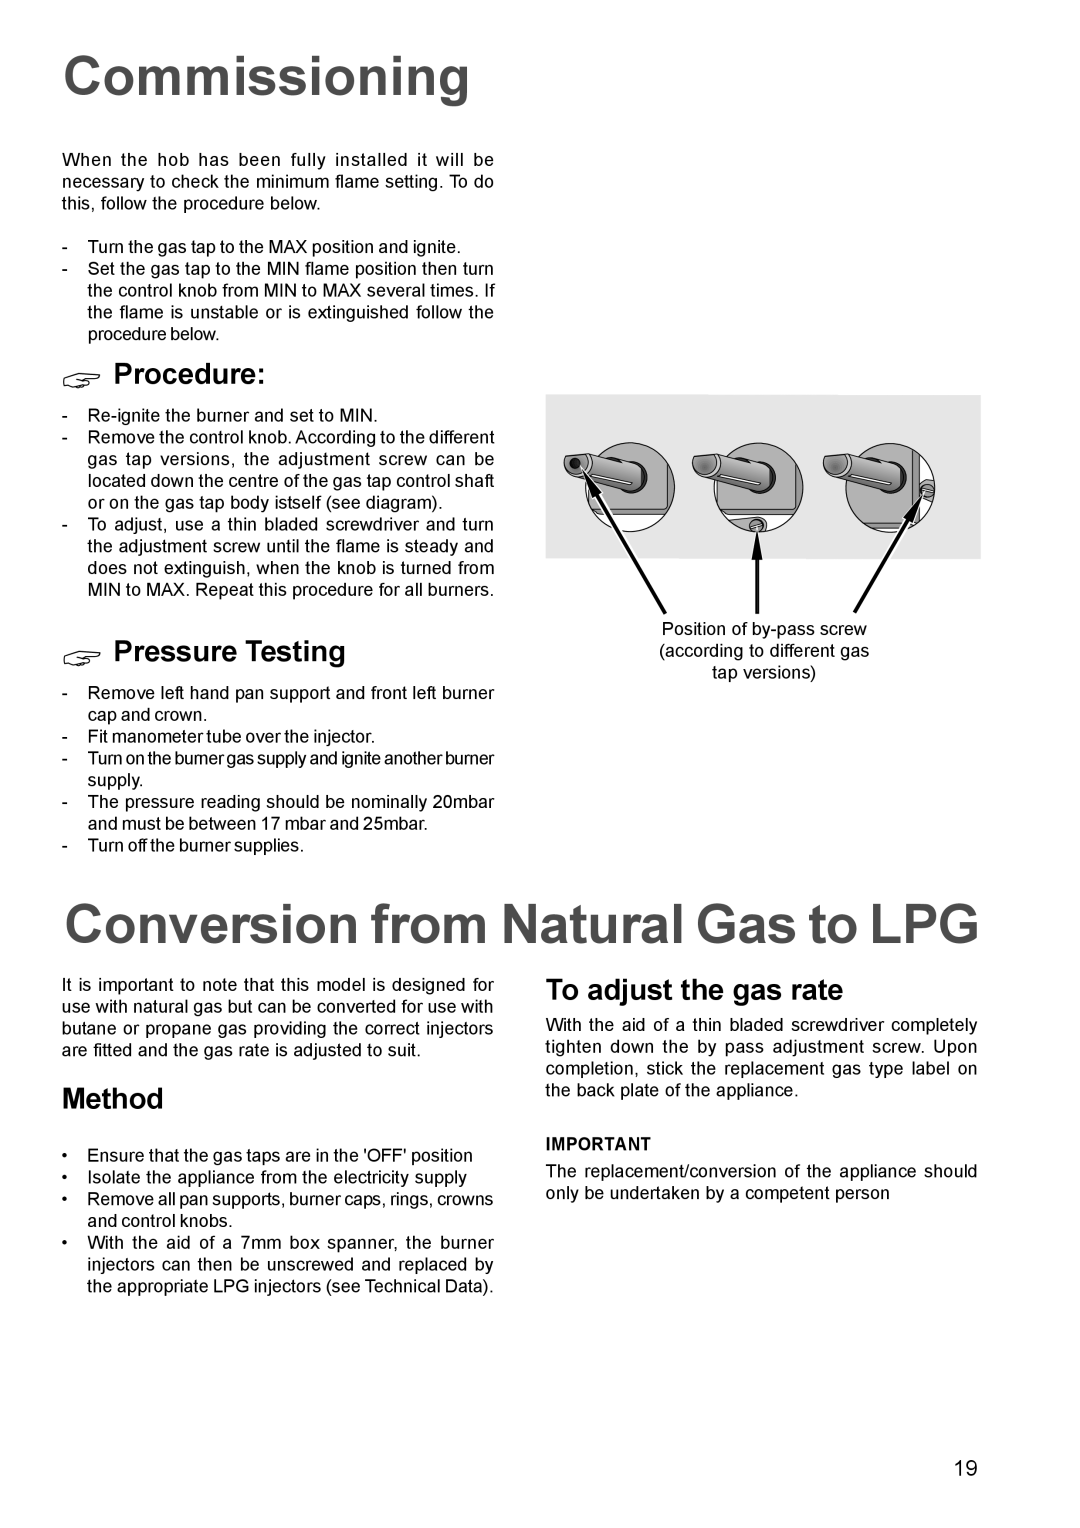 Zanussi ZCM 640 ZCM 641 manual Commissioning, Conversion from Natural Gas to LPG, Procedure, Method, To adjust the gas rate 